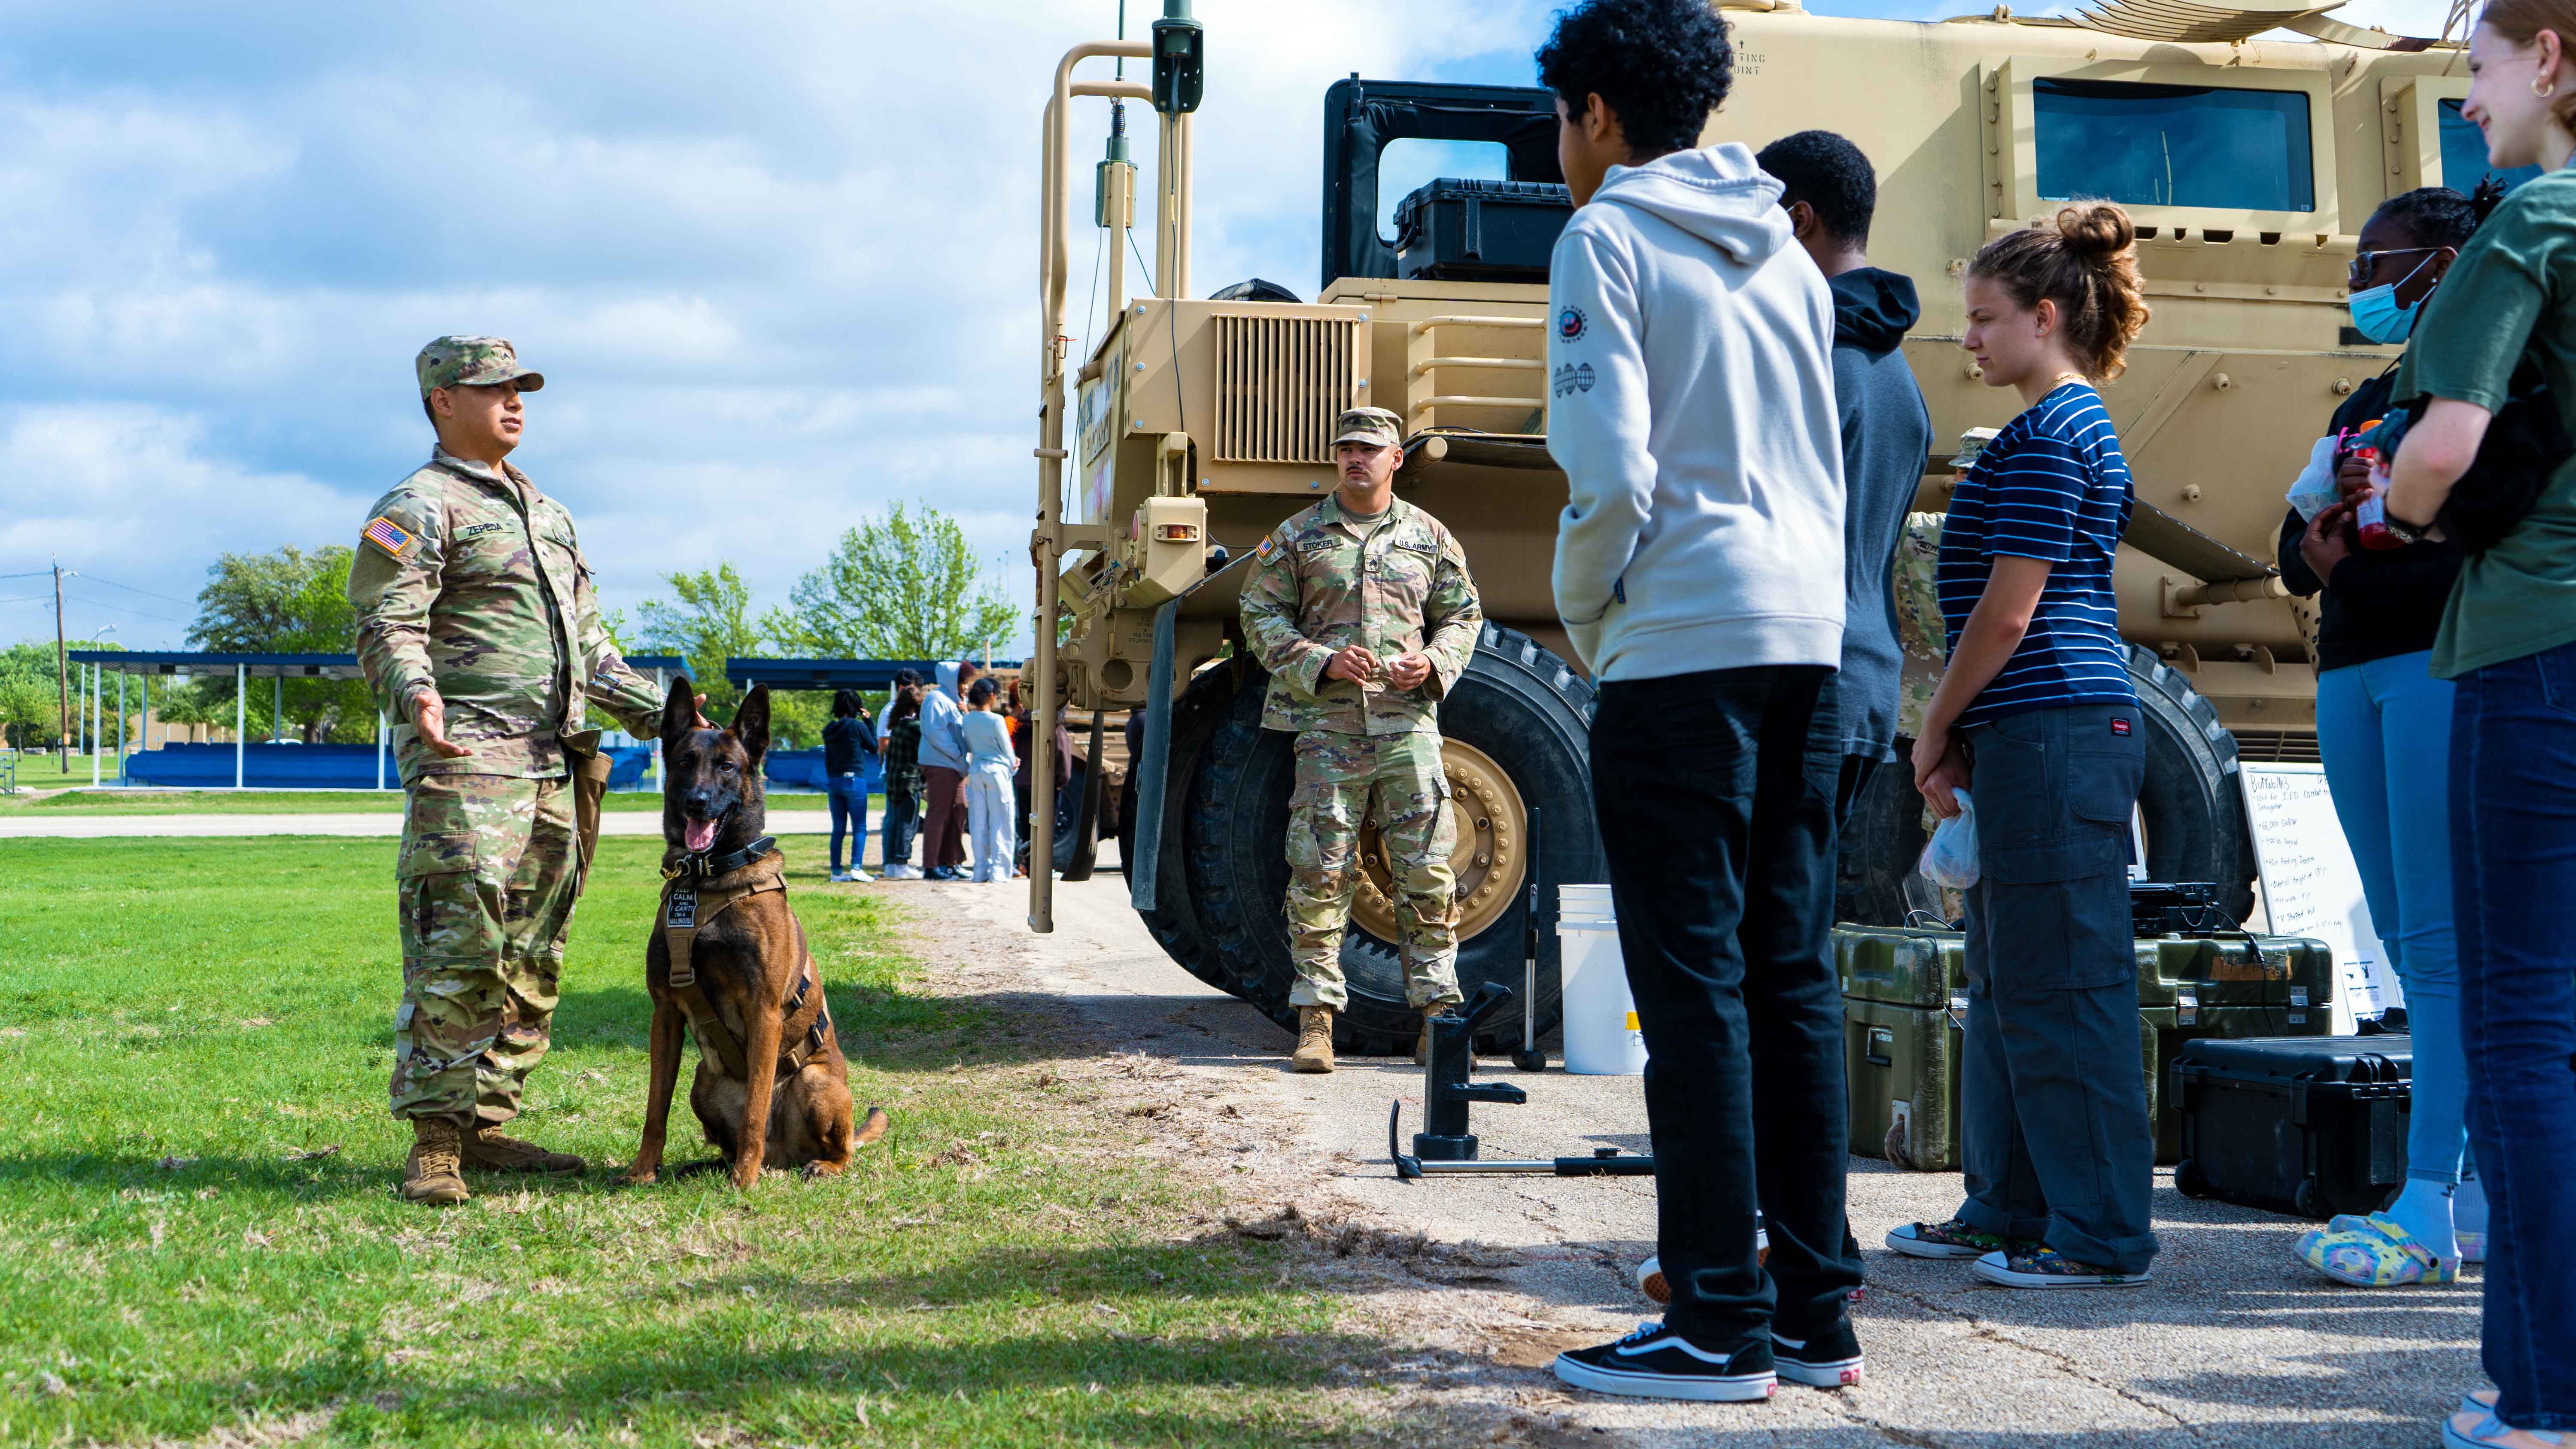 Soldiers with service dog speaking to students